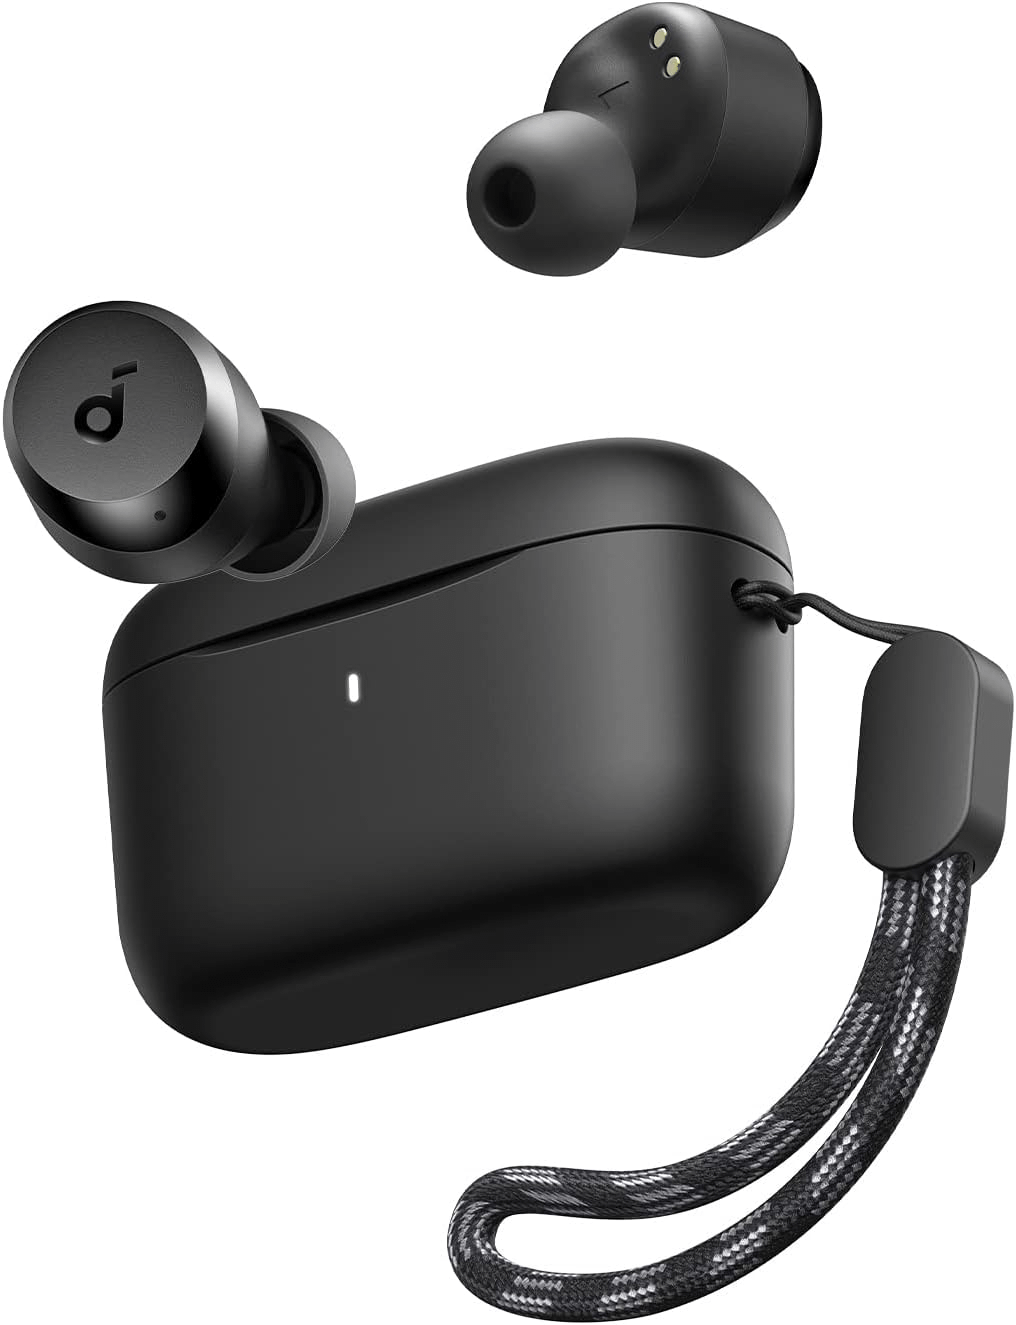 Early Black Friday Earbud Deals - Soundcore by Anker A20i